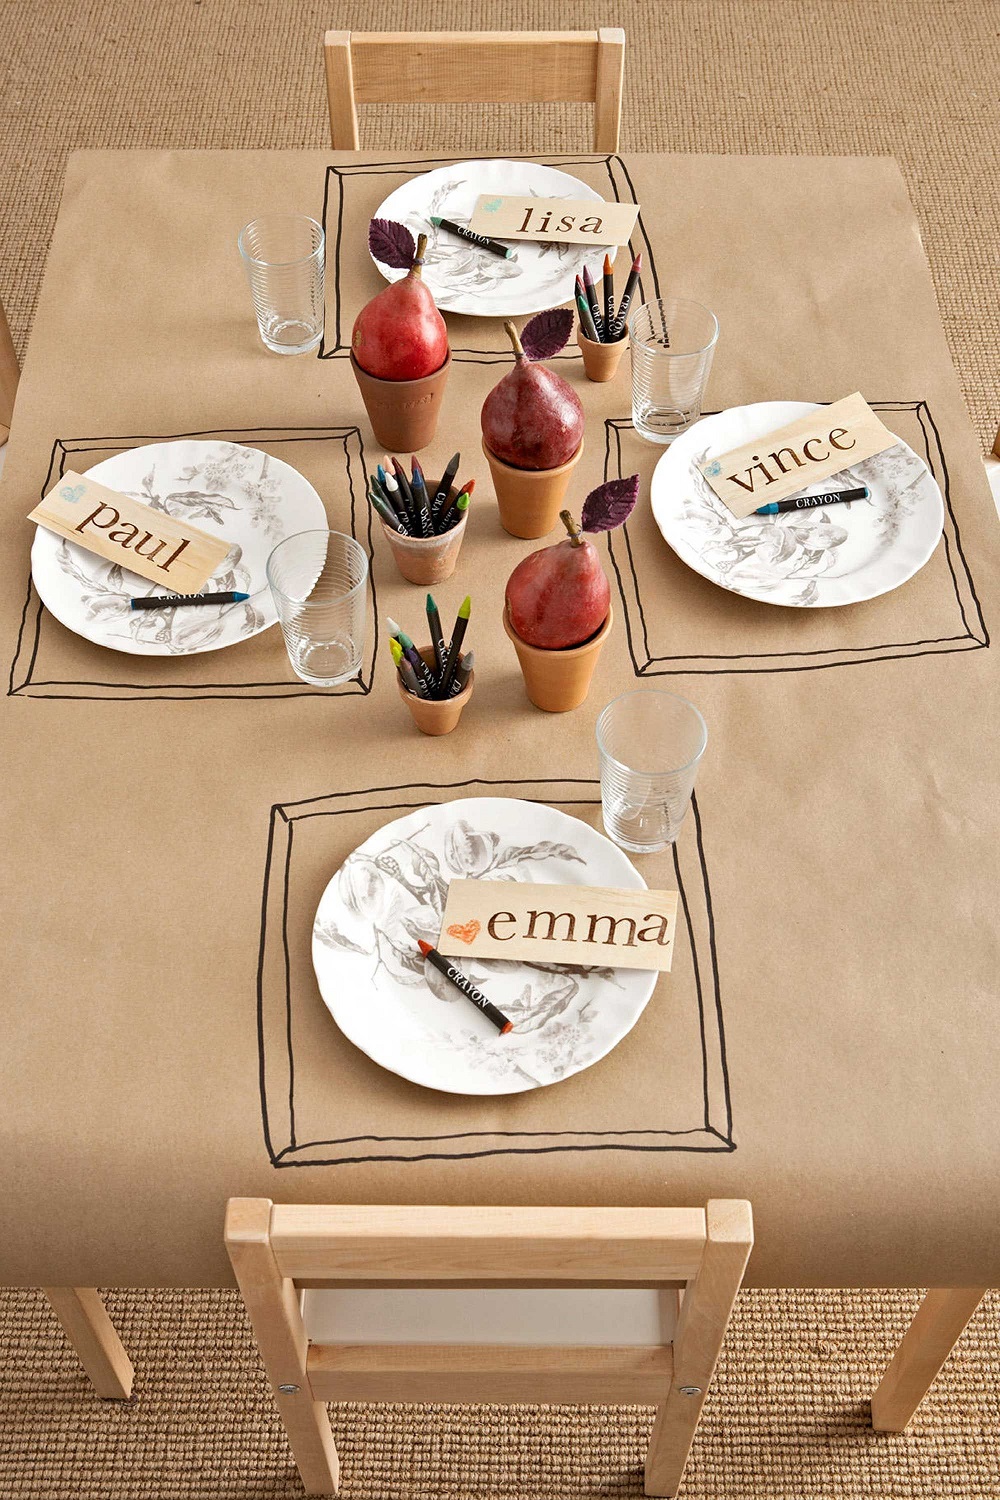 t4-5 Thanksgiving decorating ideas that will make your home look great